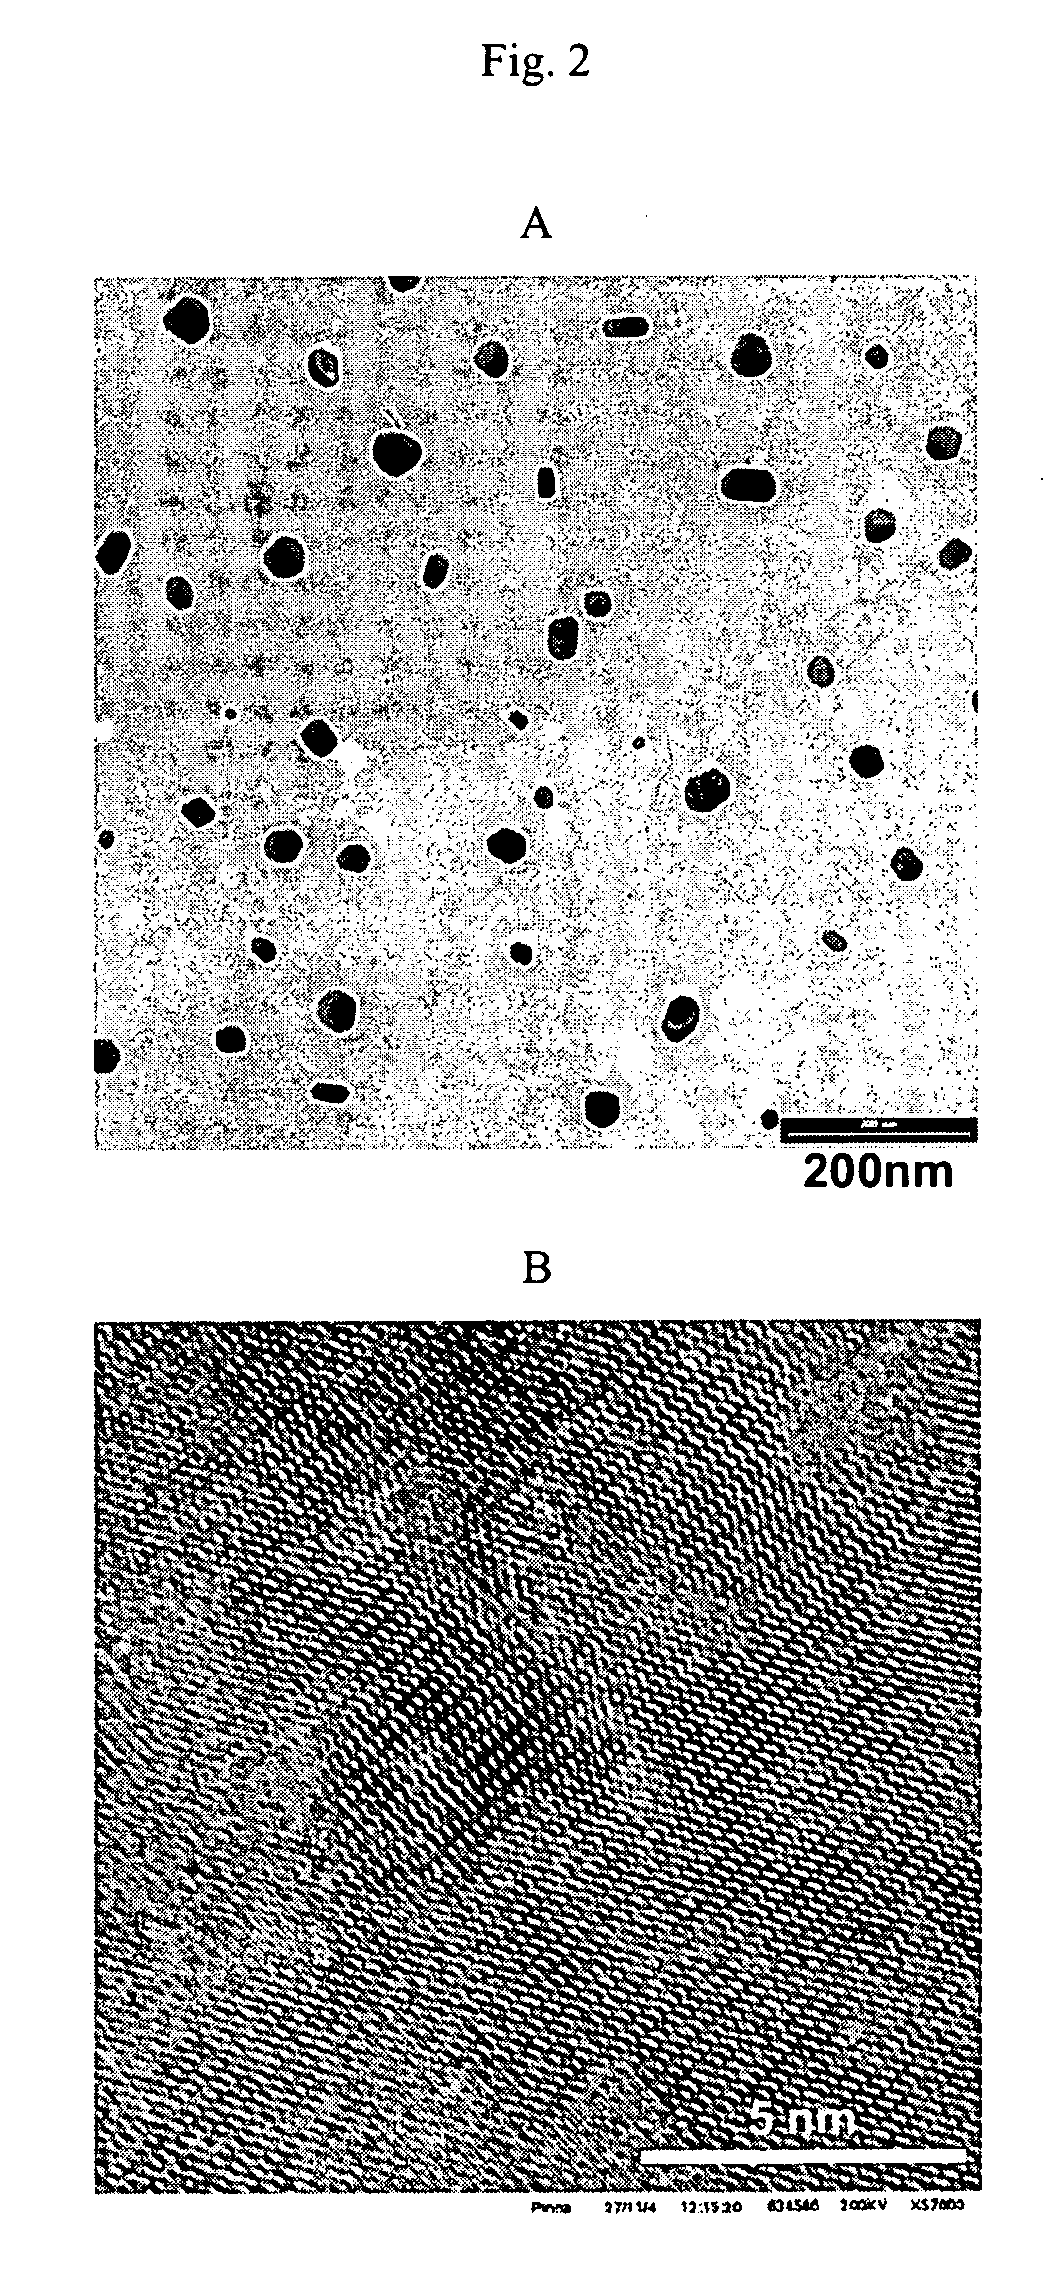 Compositions containing magnetic iron oxide particles, and use of said compositions in imaging methods